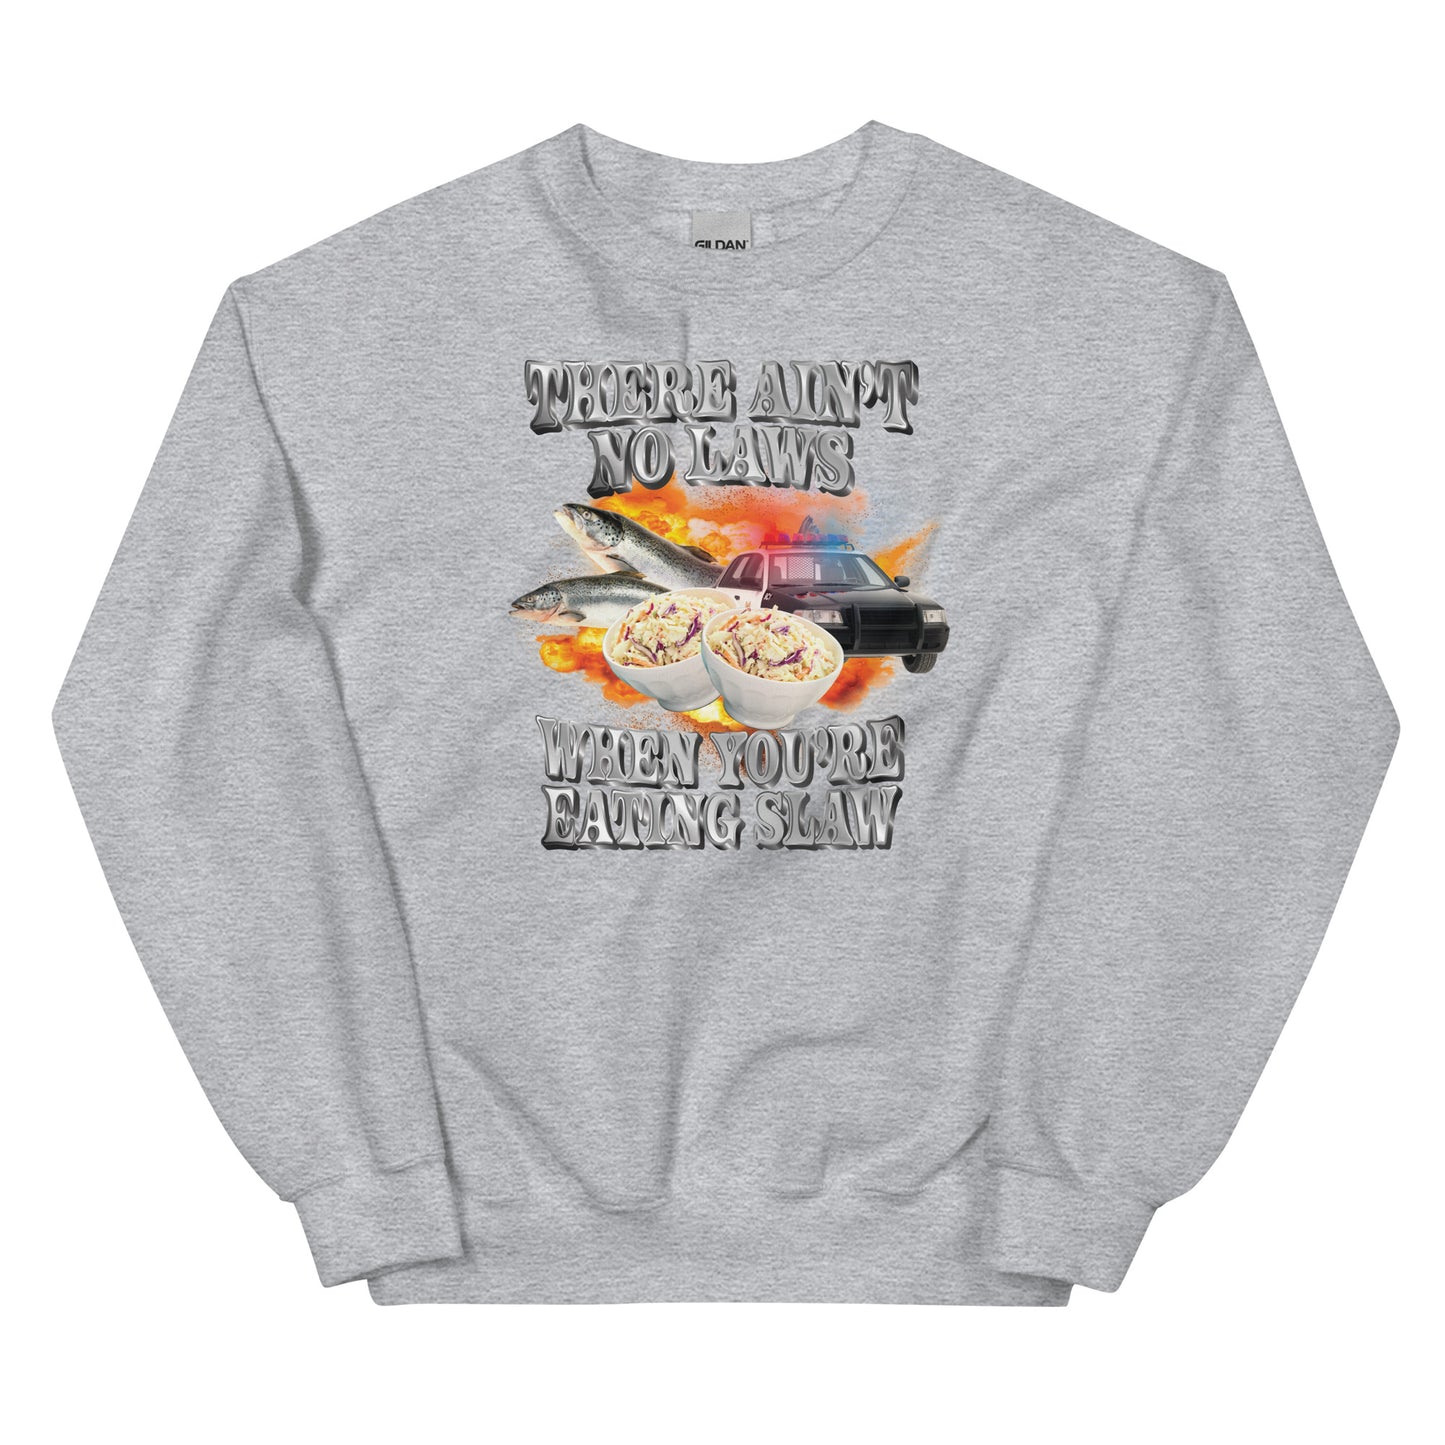 Ain't No Laws When You're Eating Slaw Unisex Sweatshirt